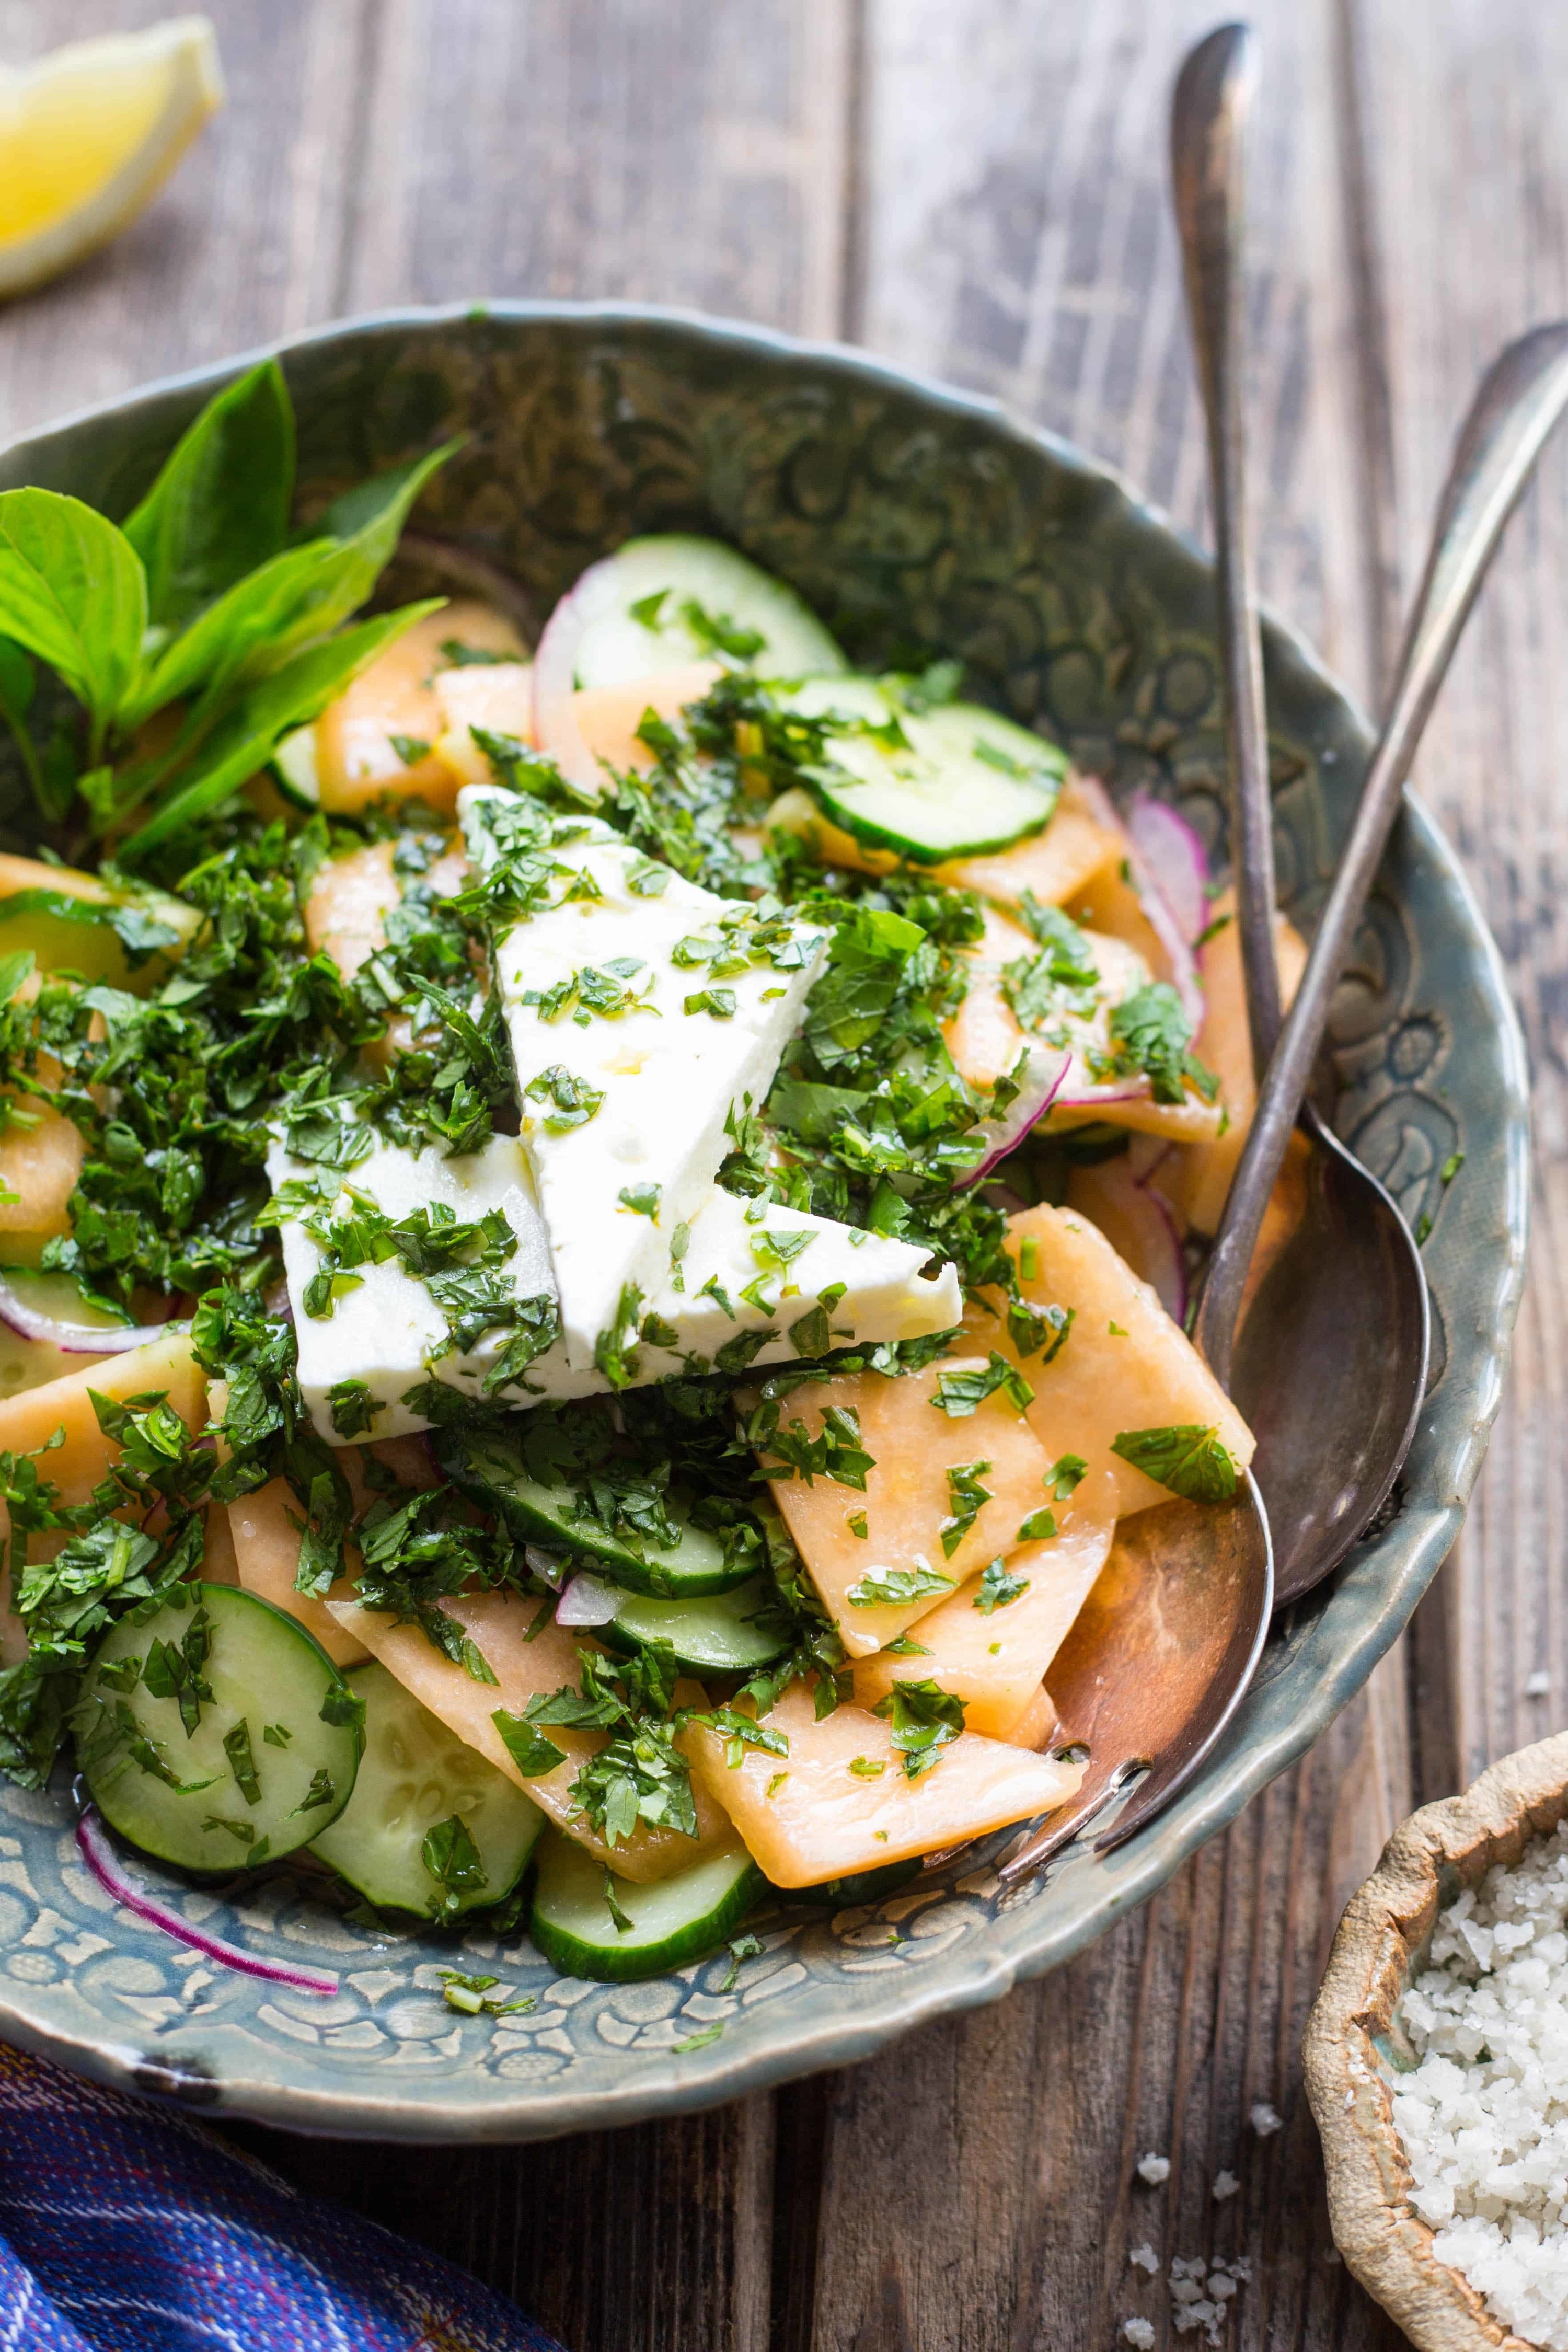 Cucumber and melon salad with feta and mint.